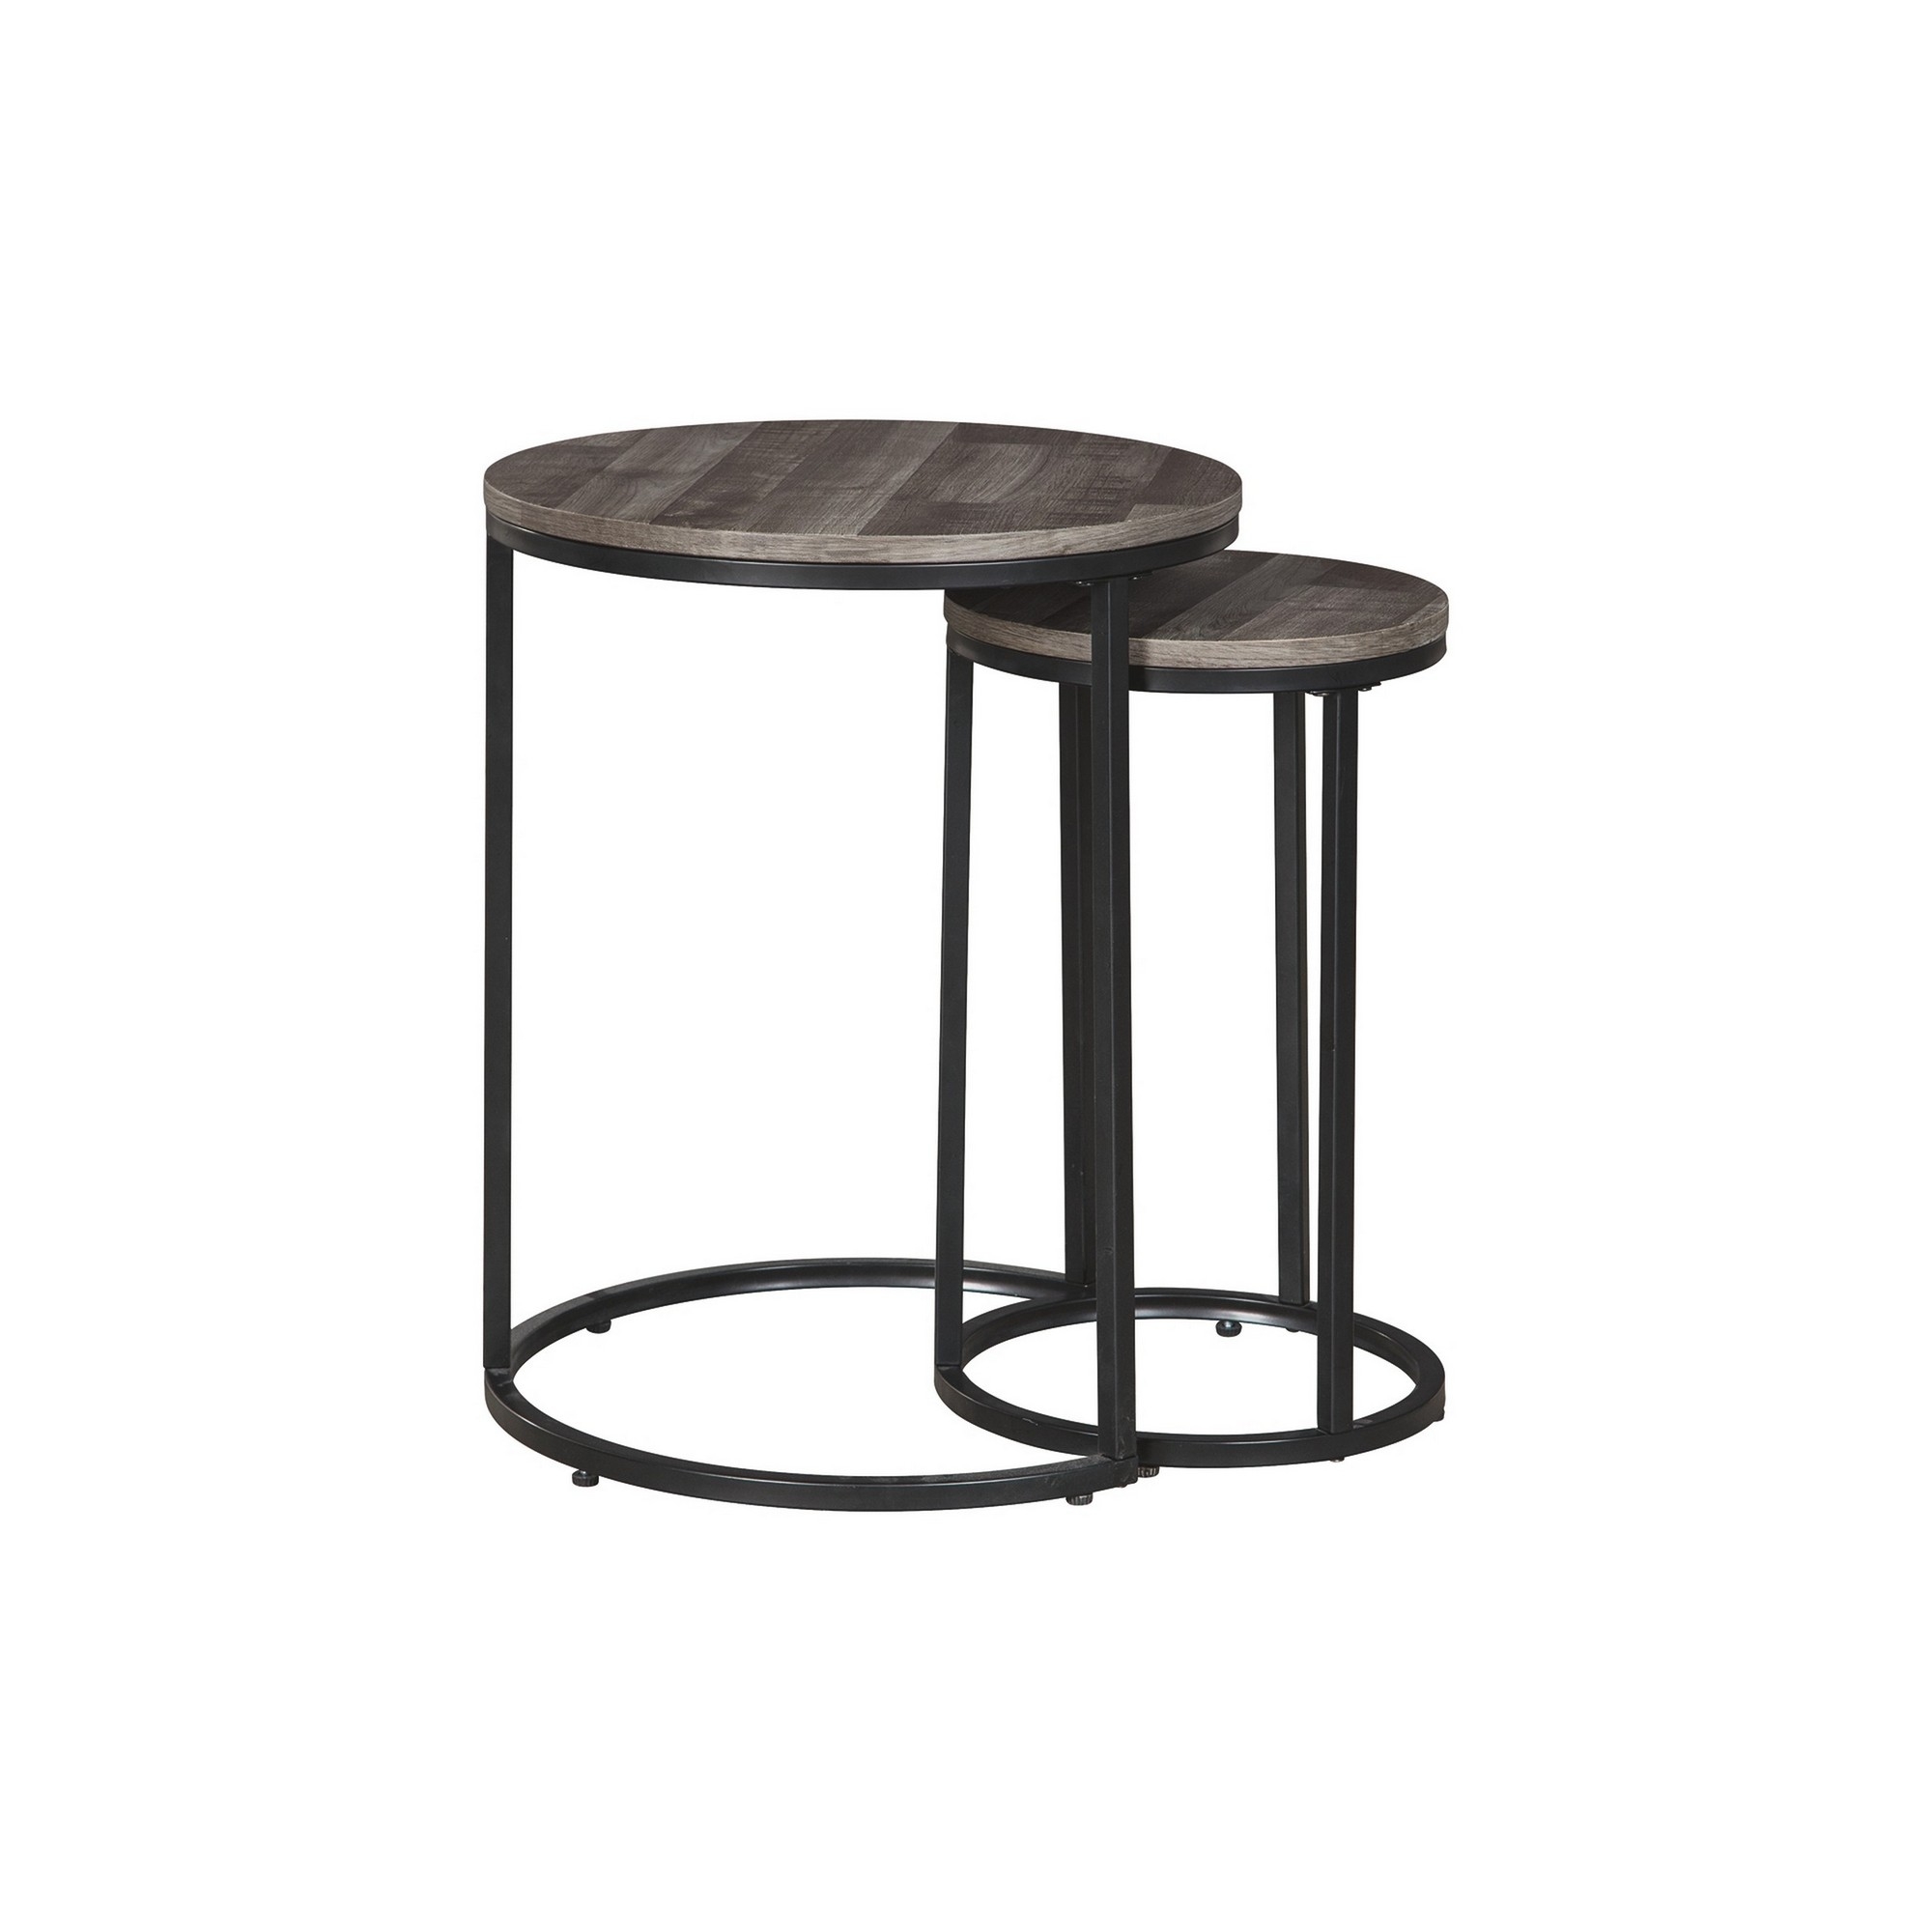 Round Wooden Top Metal Accent Table, Set Of 2, Gray And Black- Saltoro Sherpi